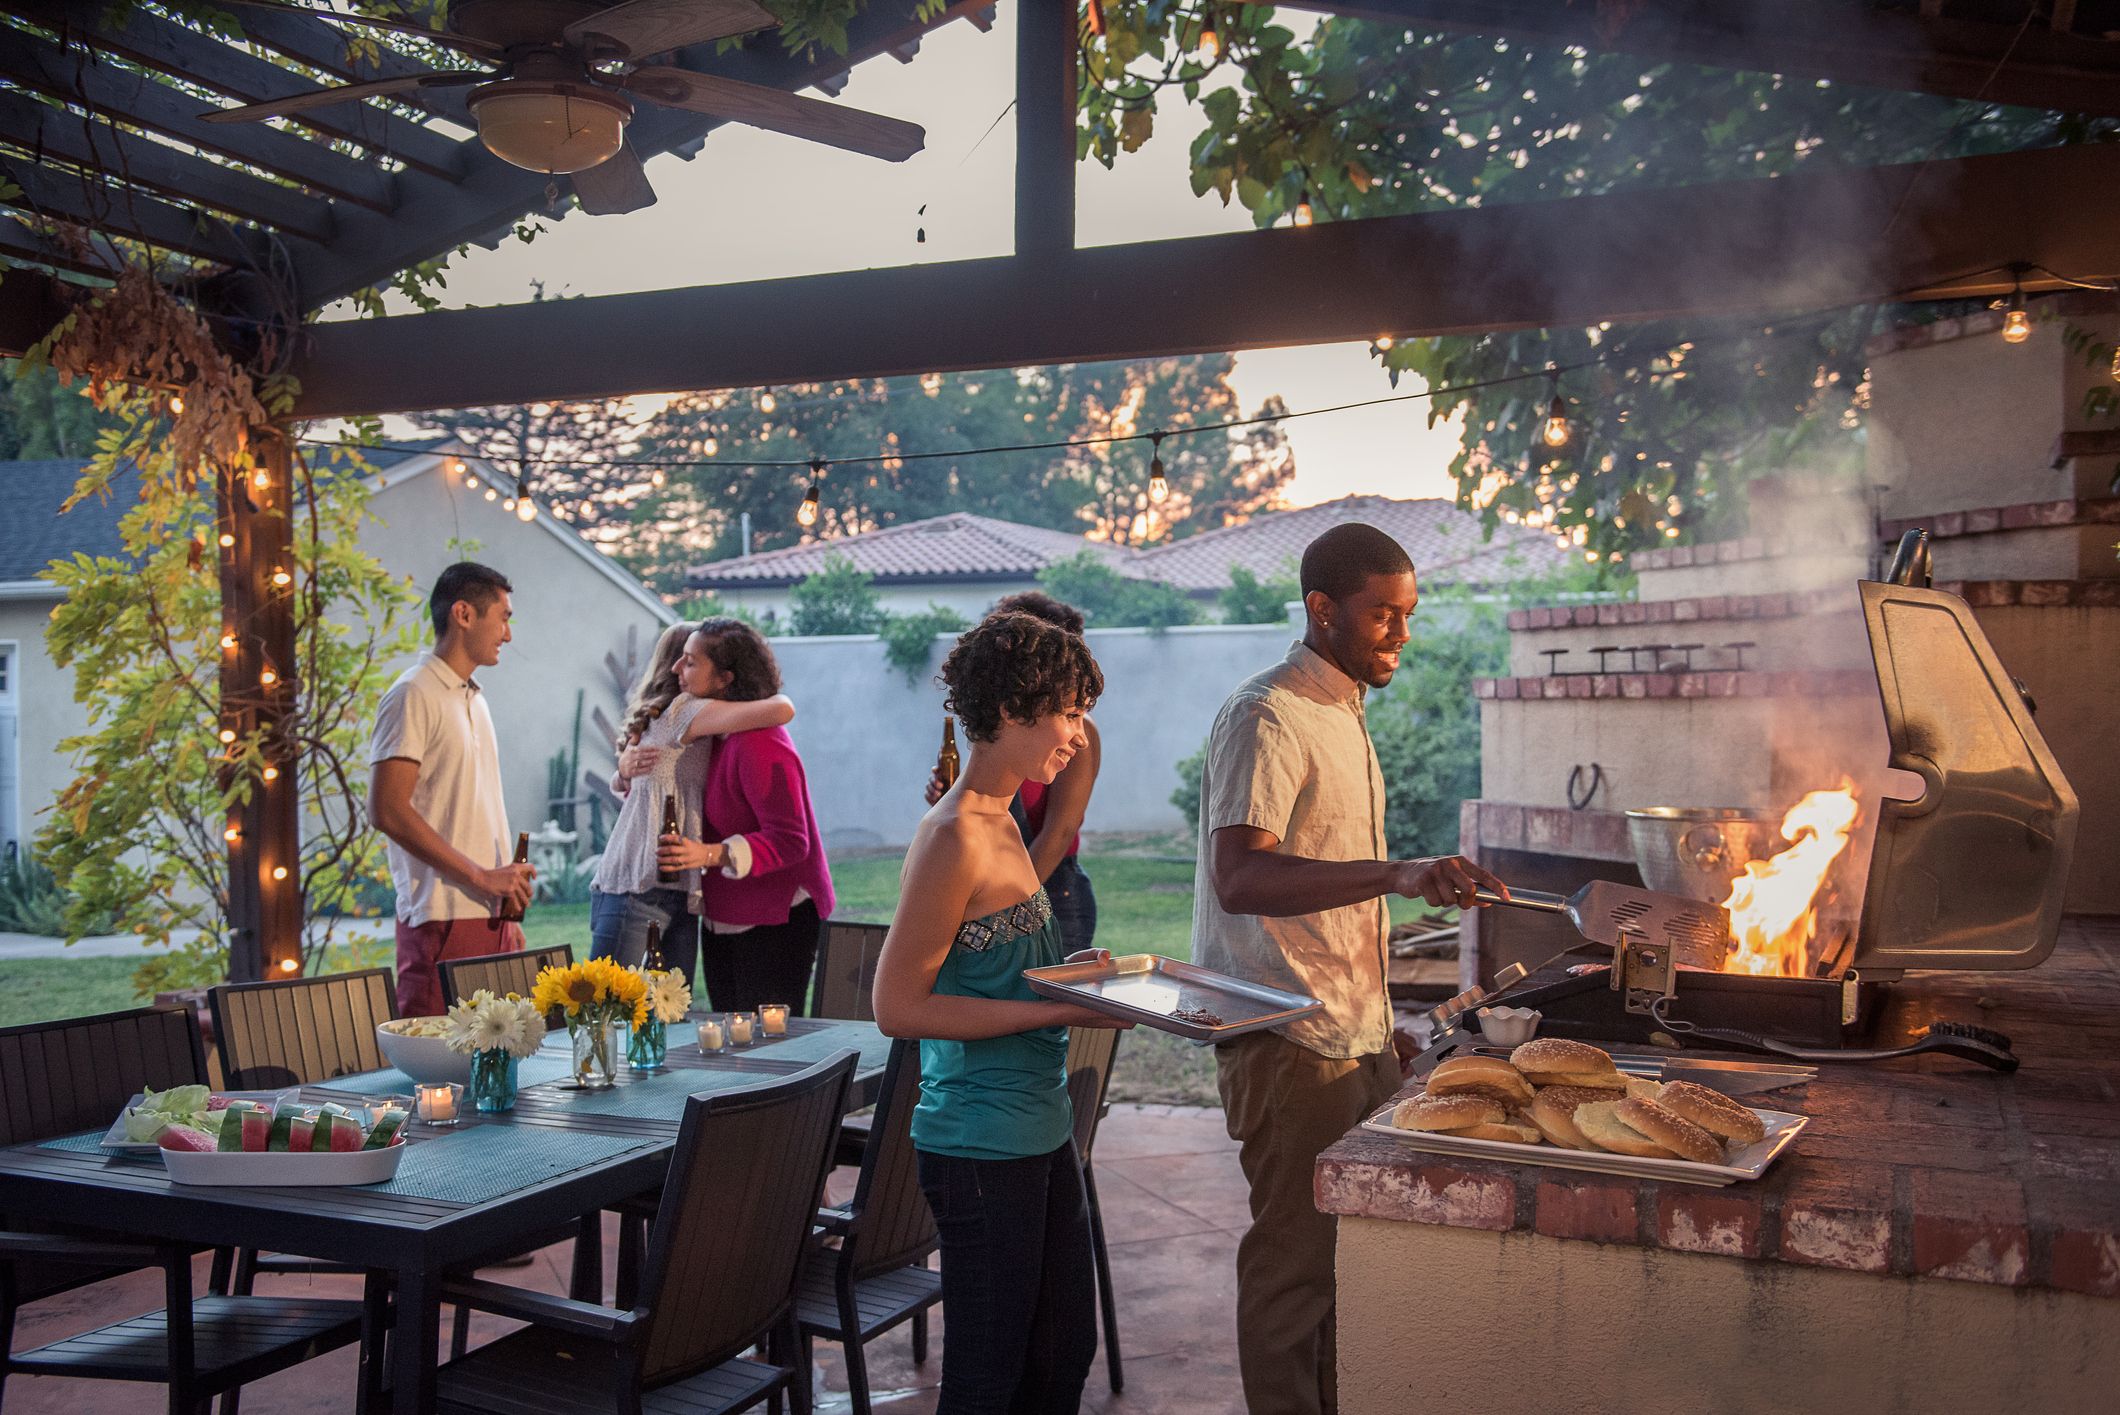 https://hips.hearstapps.com/hmg-prod/images/hipsters-grilling-at-a-summer-backyard-bbq-royalty-free-image-1654189892.jpg